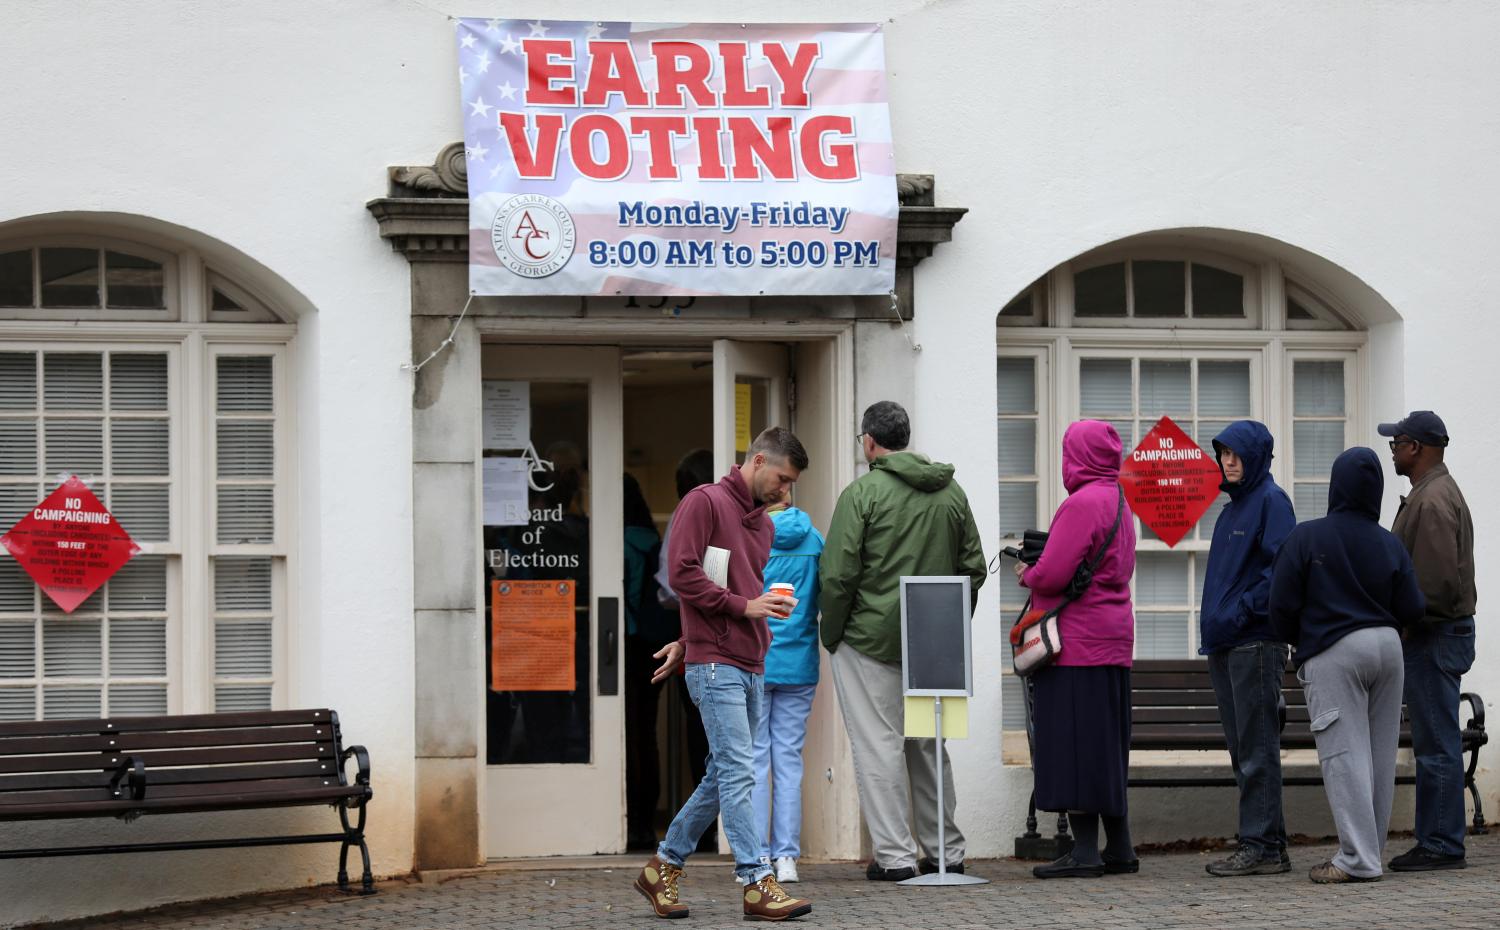 Early voters arrive at a polling station in Athens, Georgia, U.S., October 26, 2018 ahead of the midterm elections. Photo taken October 26, 2018. REUTERS/Lawrence Bryant